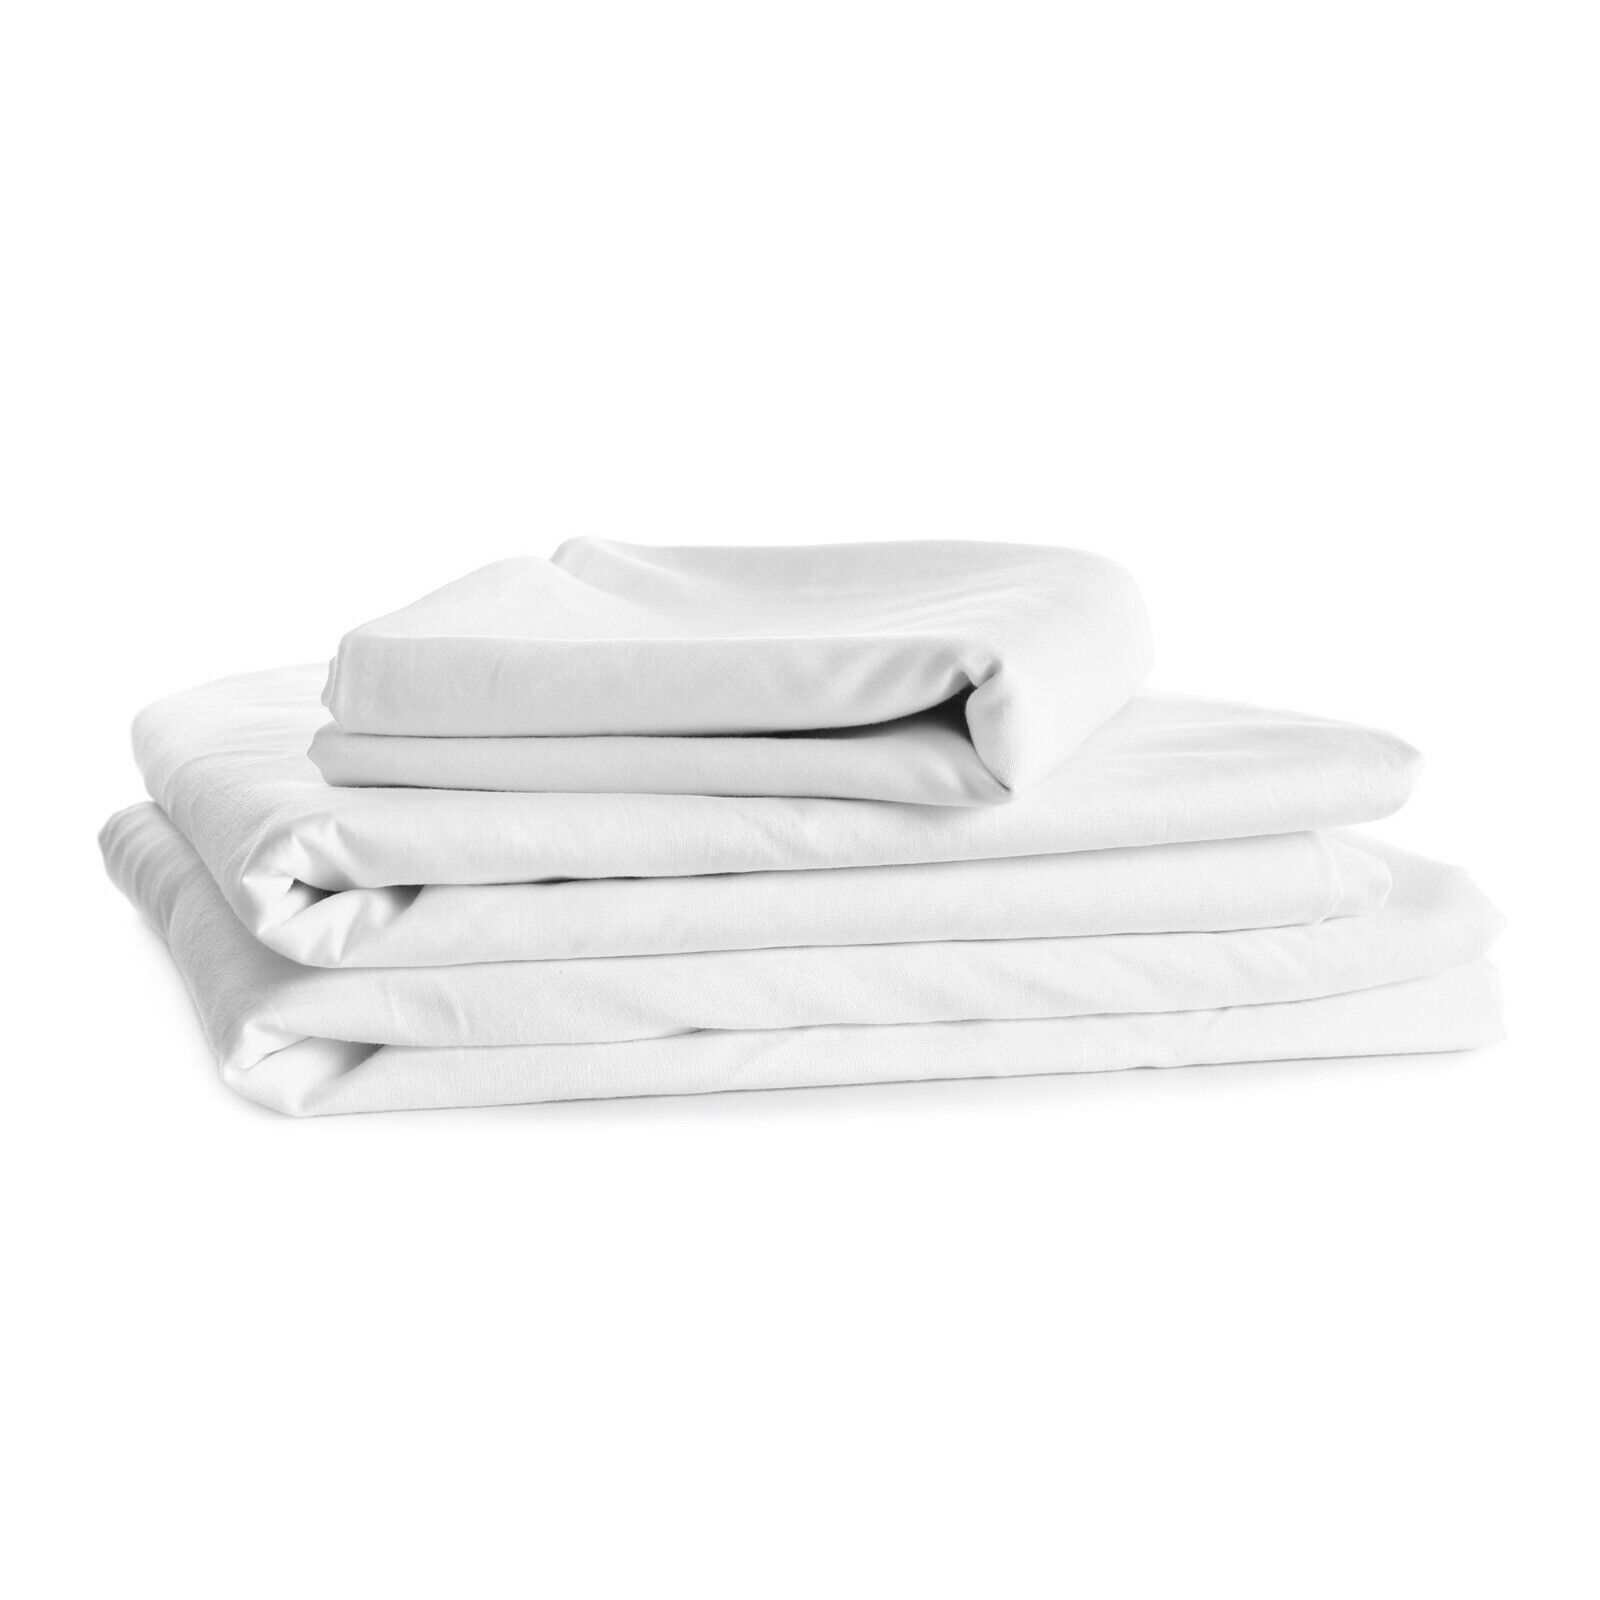 Full Size Bed Sheets Egyptian Cotton Feel 1800 Count Set 4 Piece Bed Sheet Set